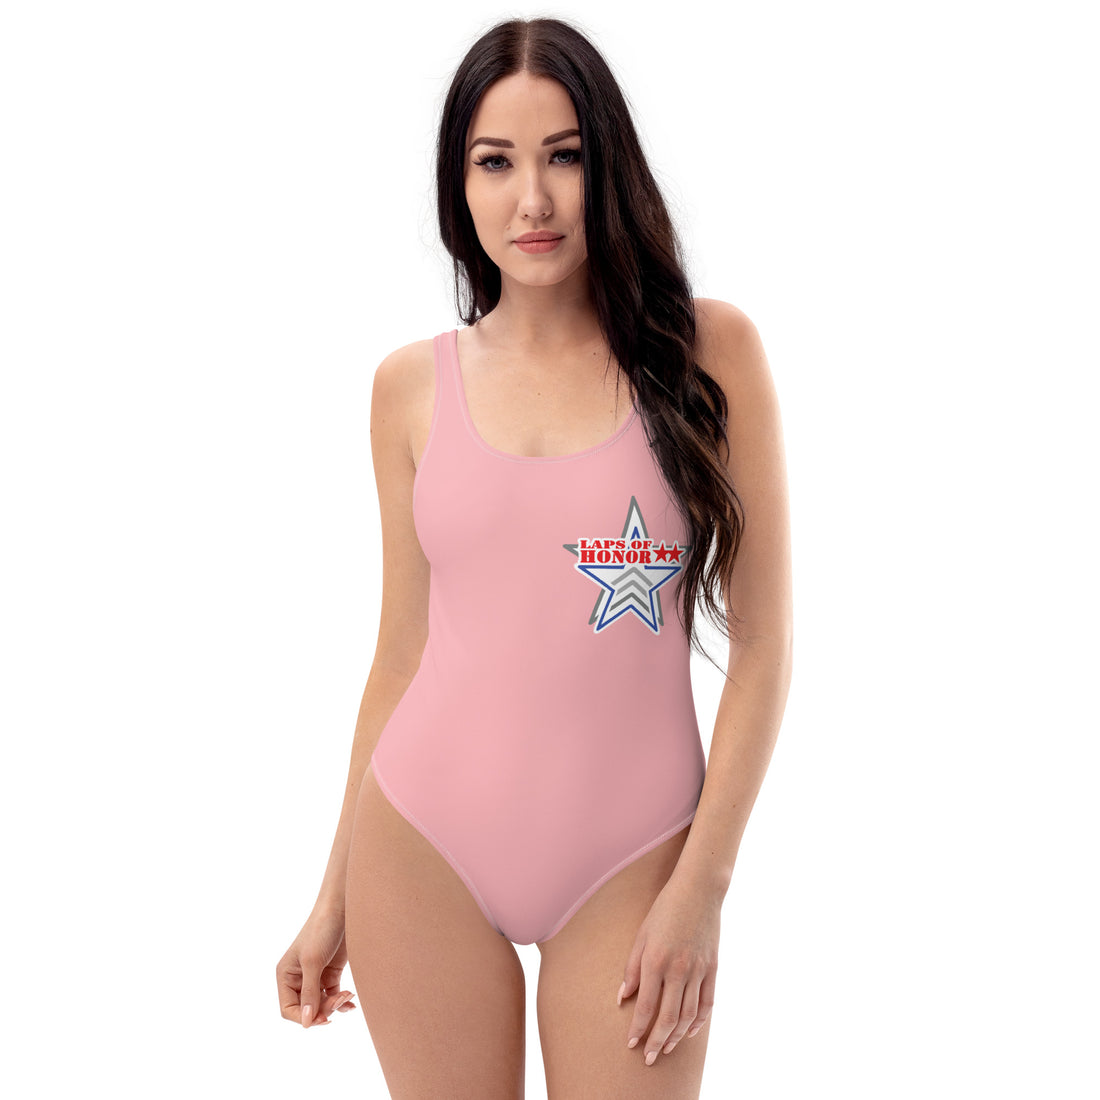 Laps of Honor: Swimsuit for a Cause